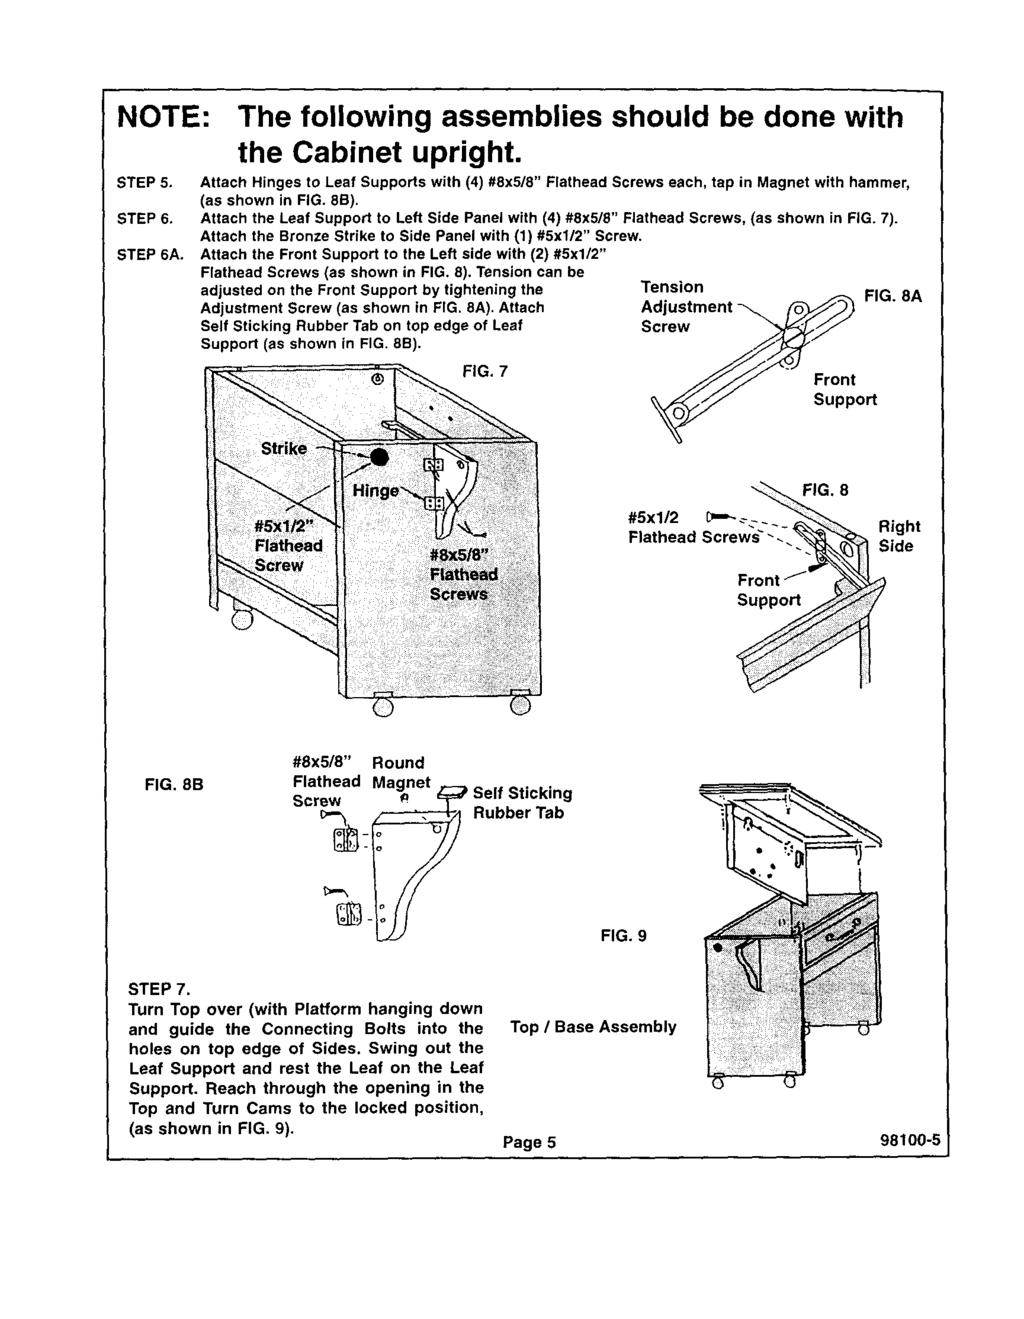 NOTE: The fllwing assemblies shuld be dne with the Cabinet upright. STEP5. STEP6. STEP 6A.